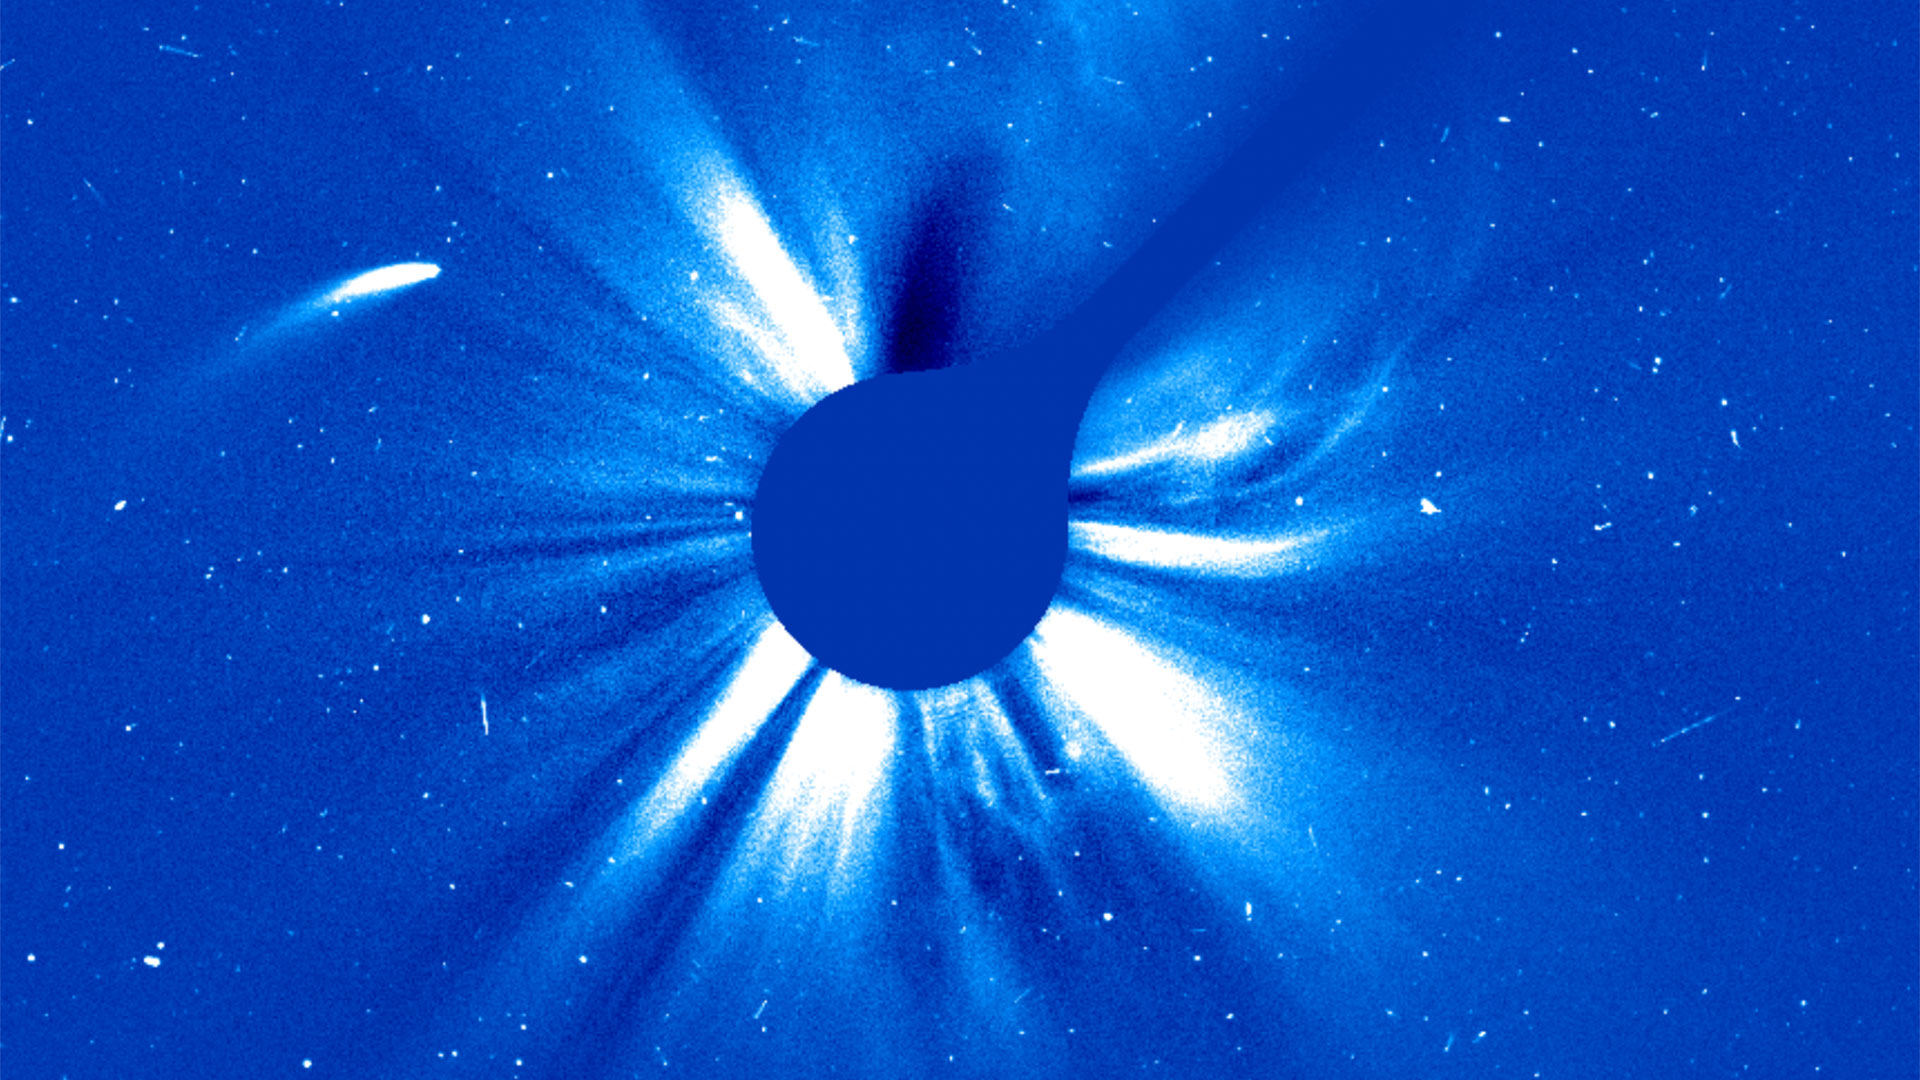 A comet's tails flare bright in this filtered view of comet 96/P Macholz passing close to the Sun.